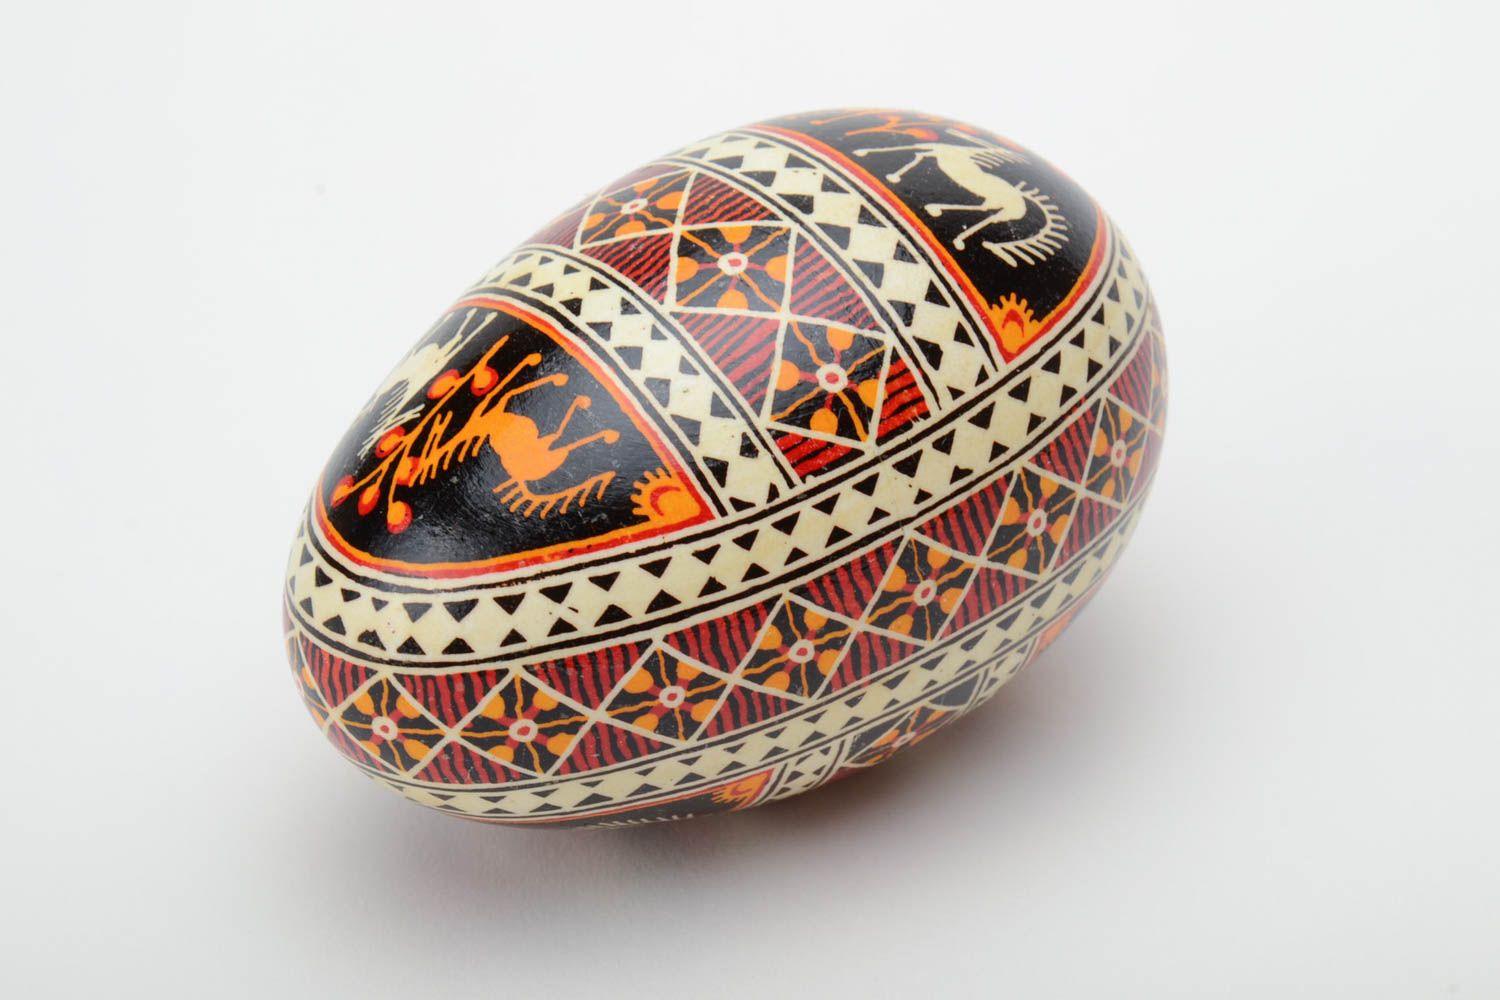 Handmade decorative art painted Easter egg traditional pysanka with horses image photo 2